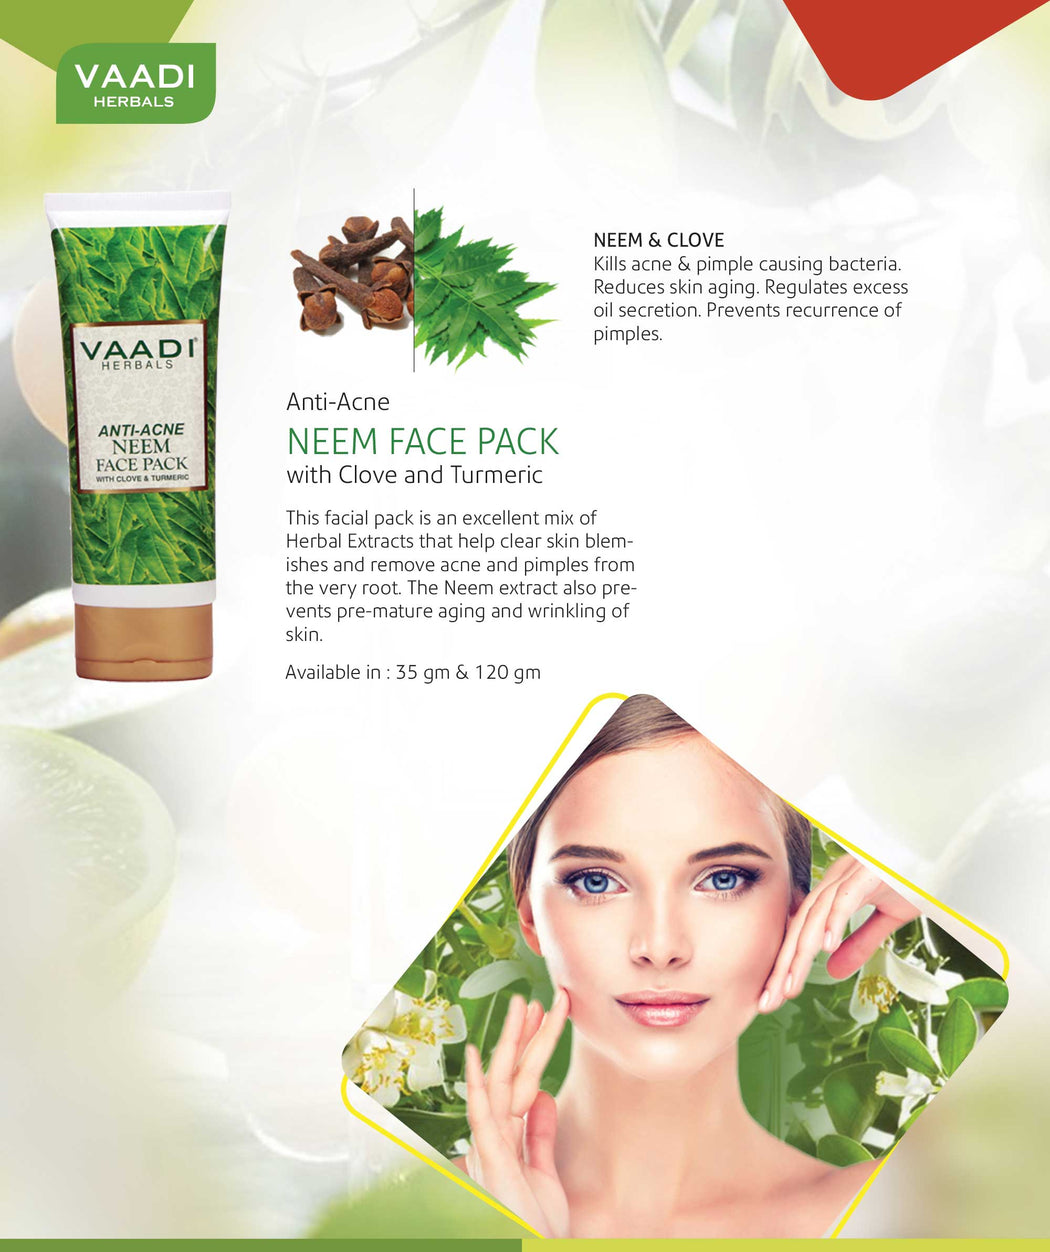 Anti Acne Neem Face Pack With Clove And Turmeric (600 gms)